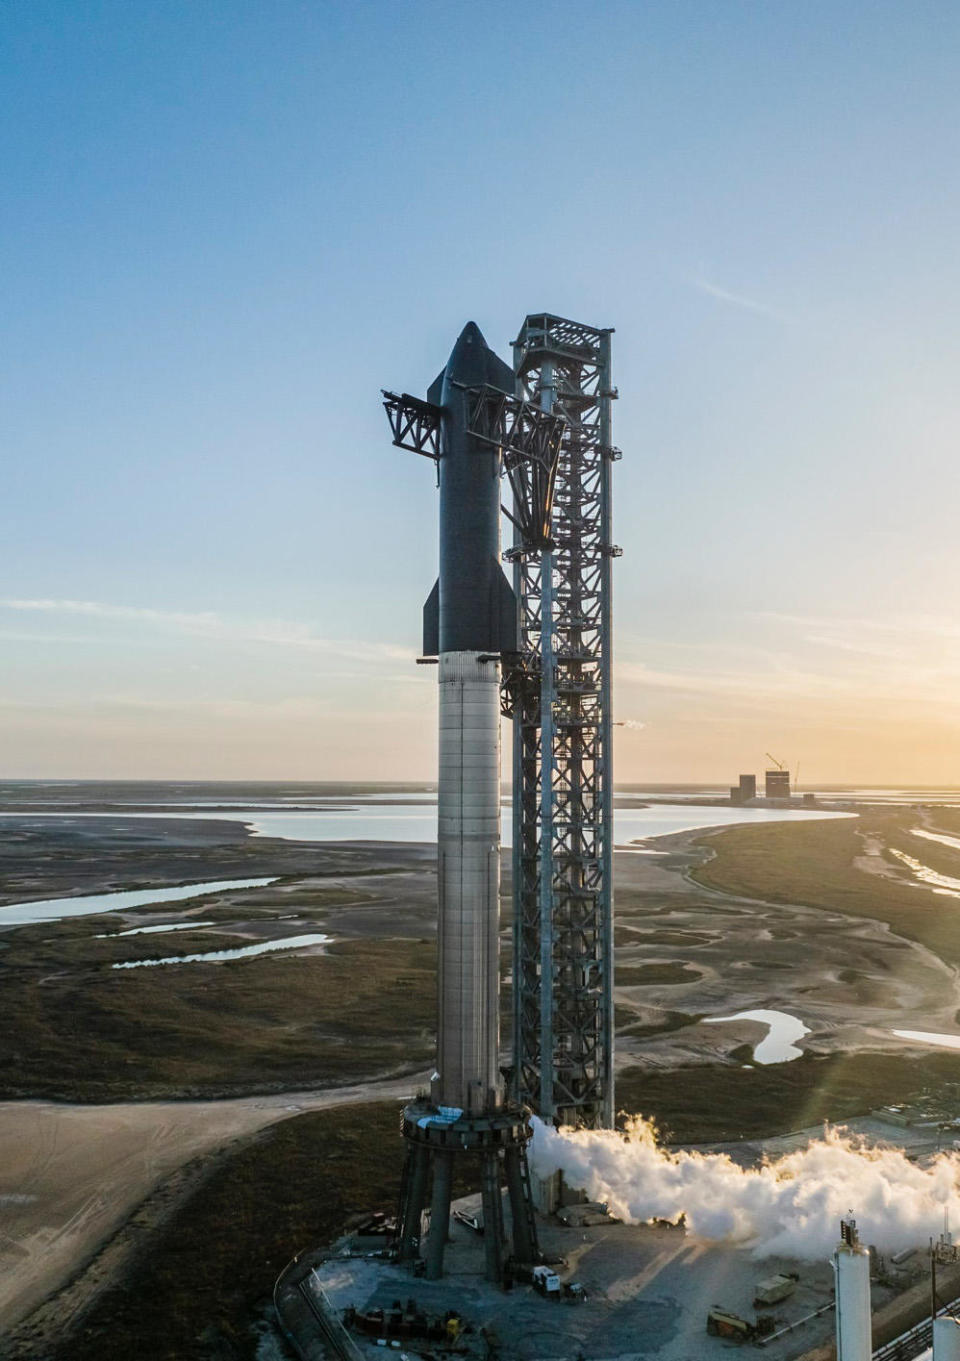 The Starship-Super Heavy launch vehicle, seen here during propellant loading tests, stands 400 feet tall and measures 30 feet wide. It is the largest, most powerful rocket ever built. SpaceX hopes to launch the huge booster on its first test flight to orbit later this year. / Credit: SpaceX